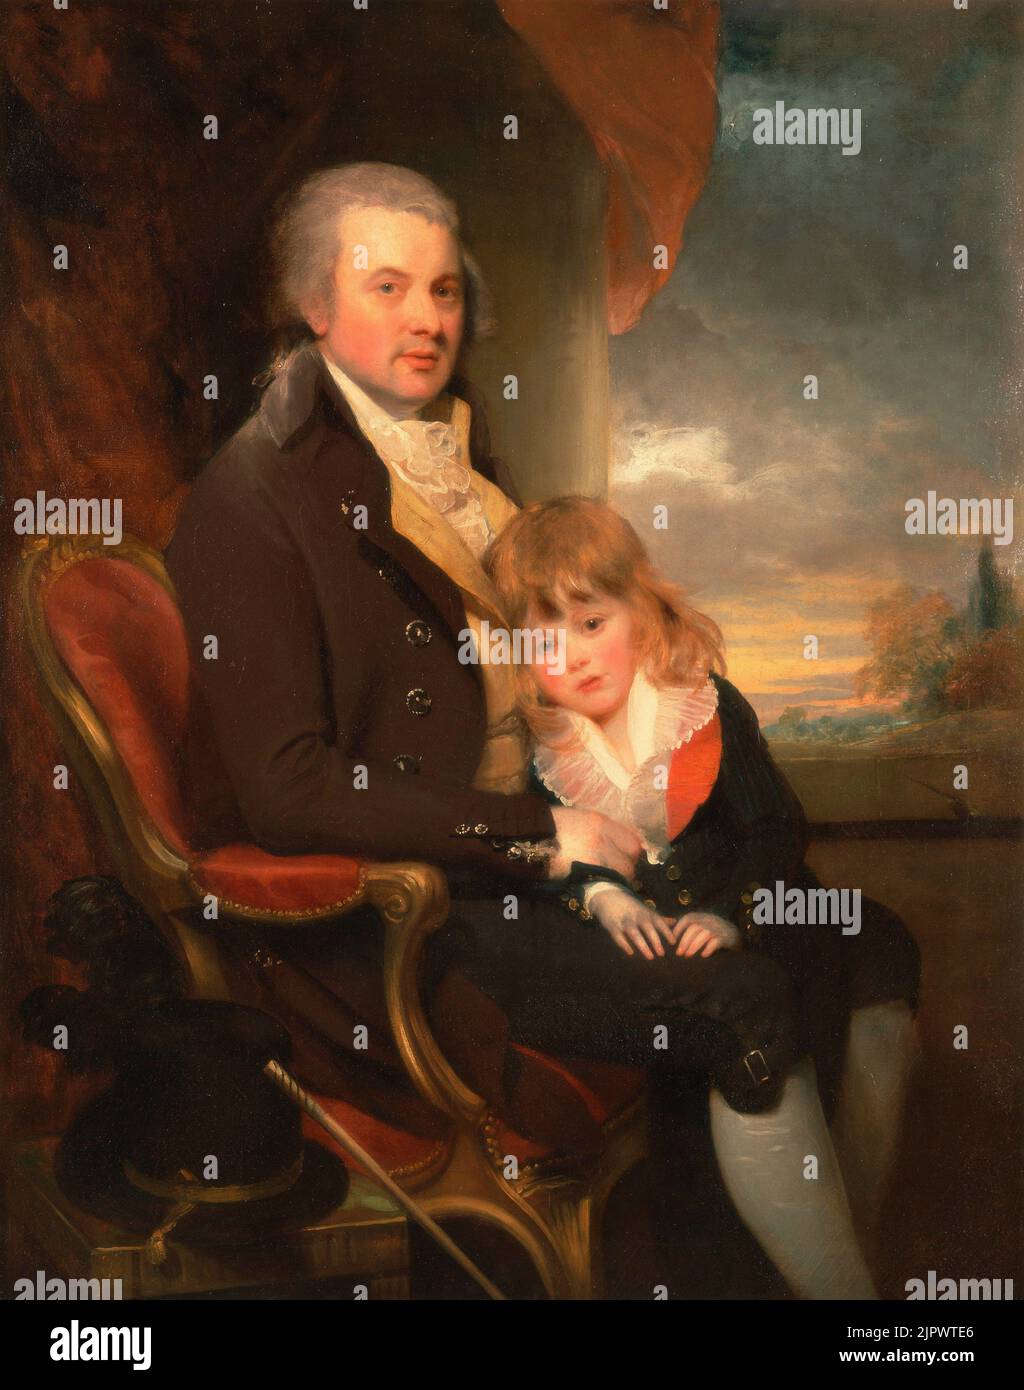 Edward George Lind and His Son, Montague by Sir William Beechey.  ca. 1800. Stock Photo